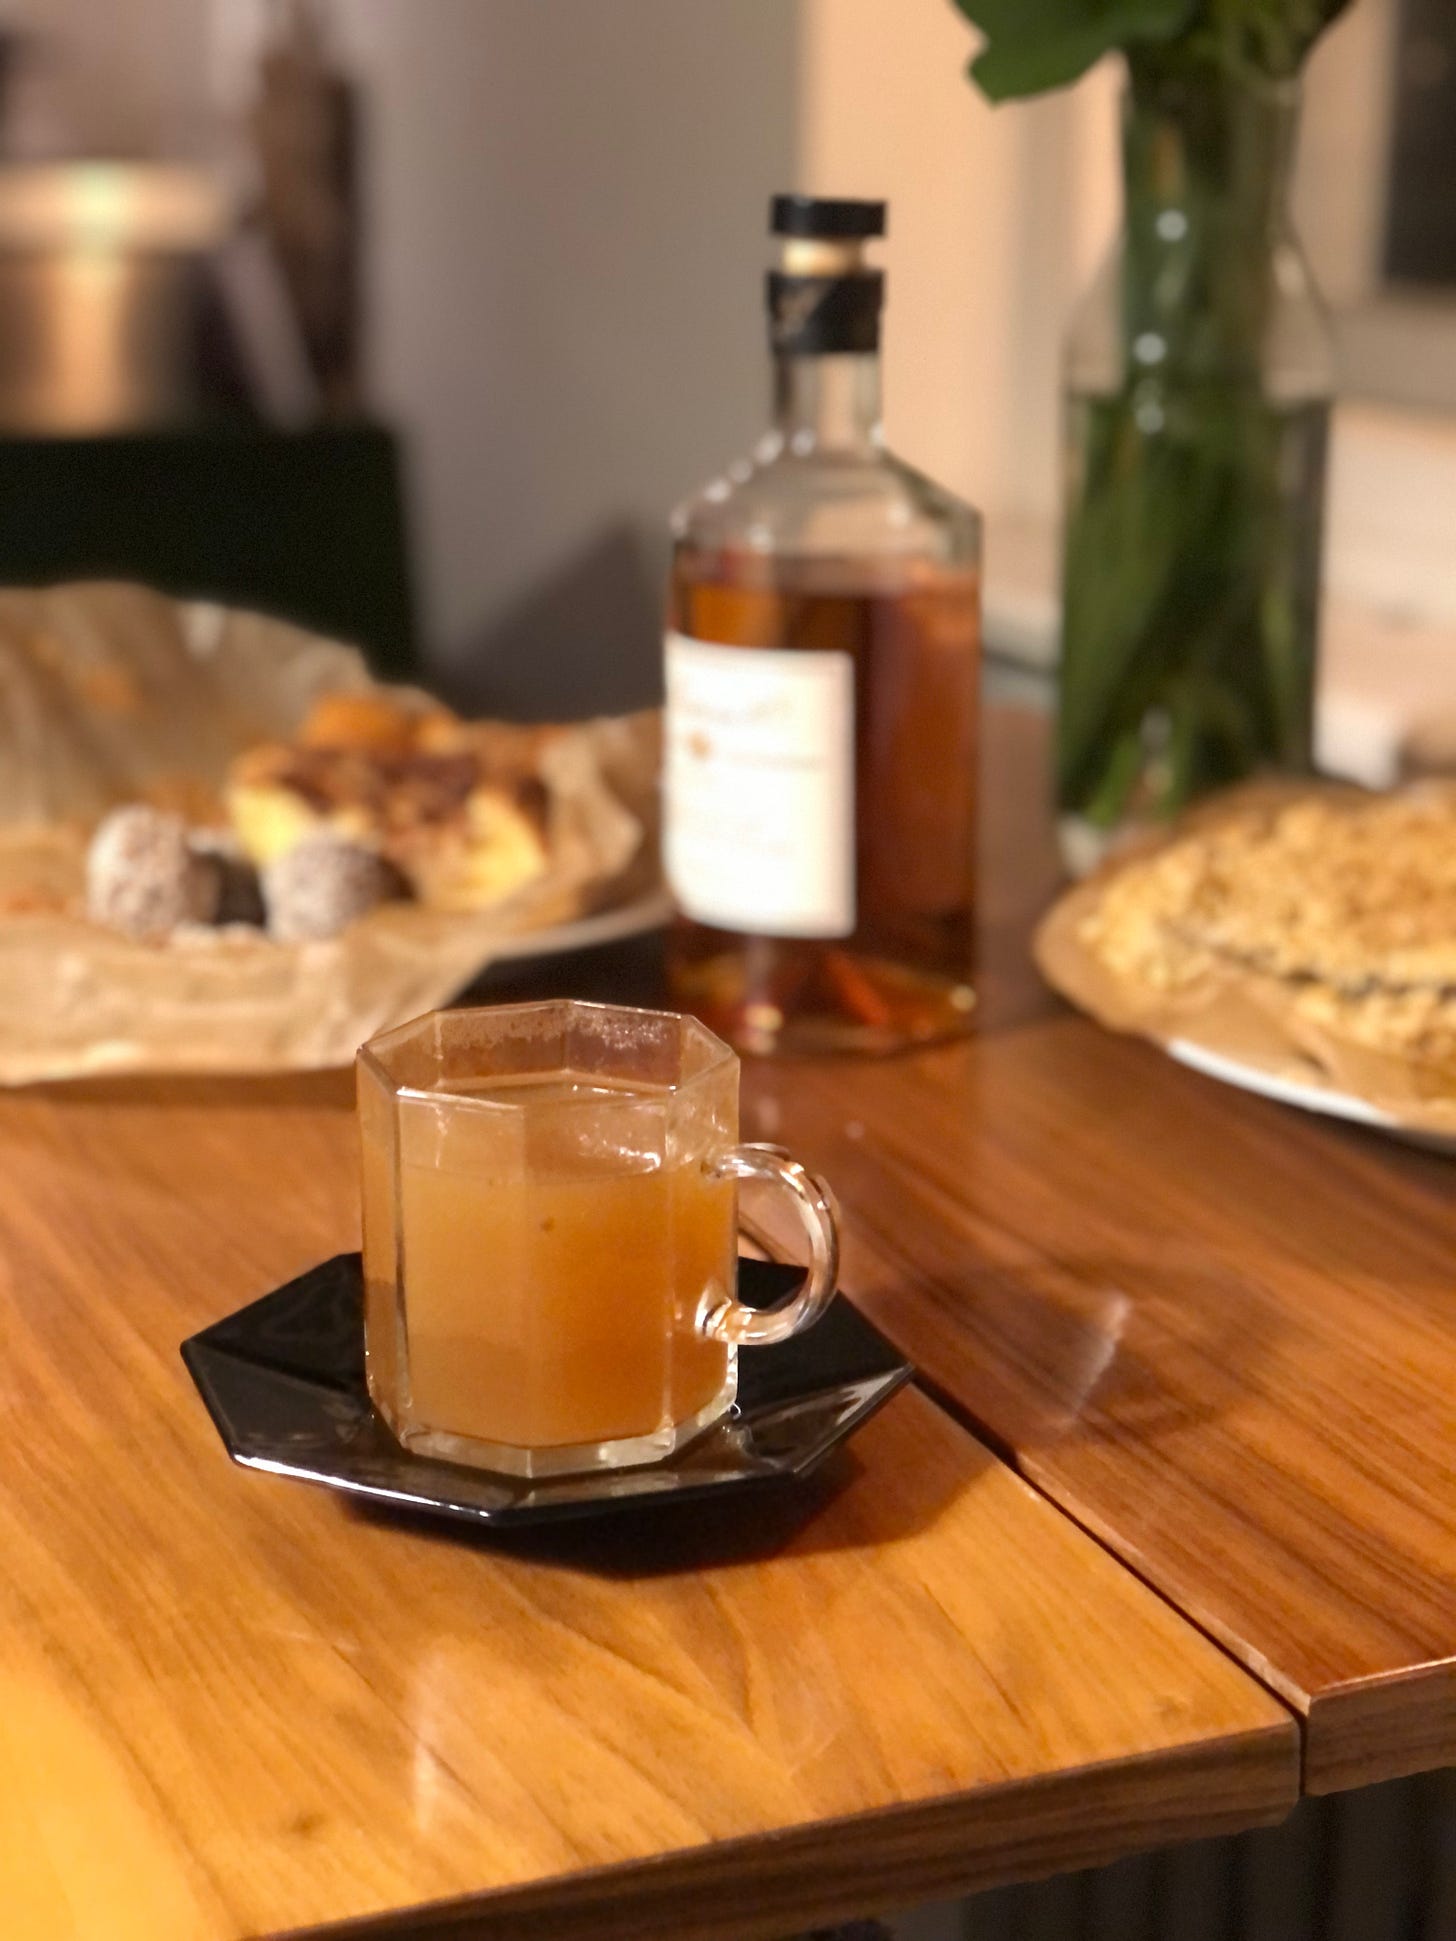 A clear octagonal short glass with a handle, on a black octagonal saucer, on the edge of a wooden table. In the glass is a cloudy amber liquid. Out of focus behind, a bottle of amber spirit, and two dishes of food. 